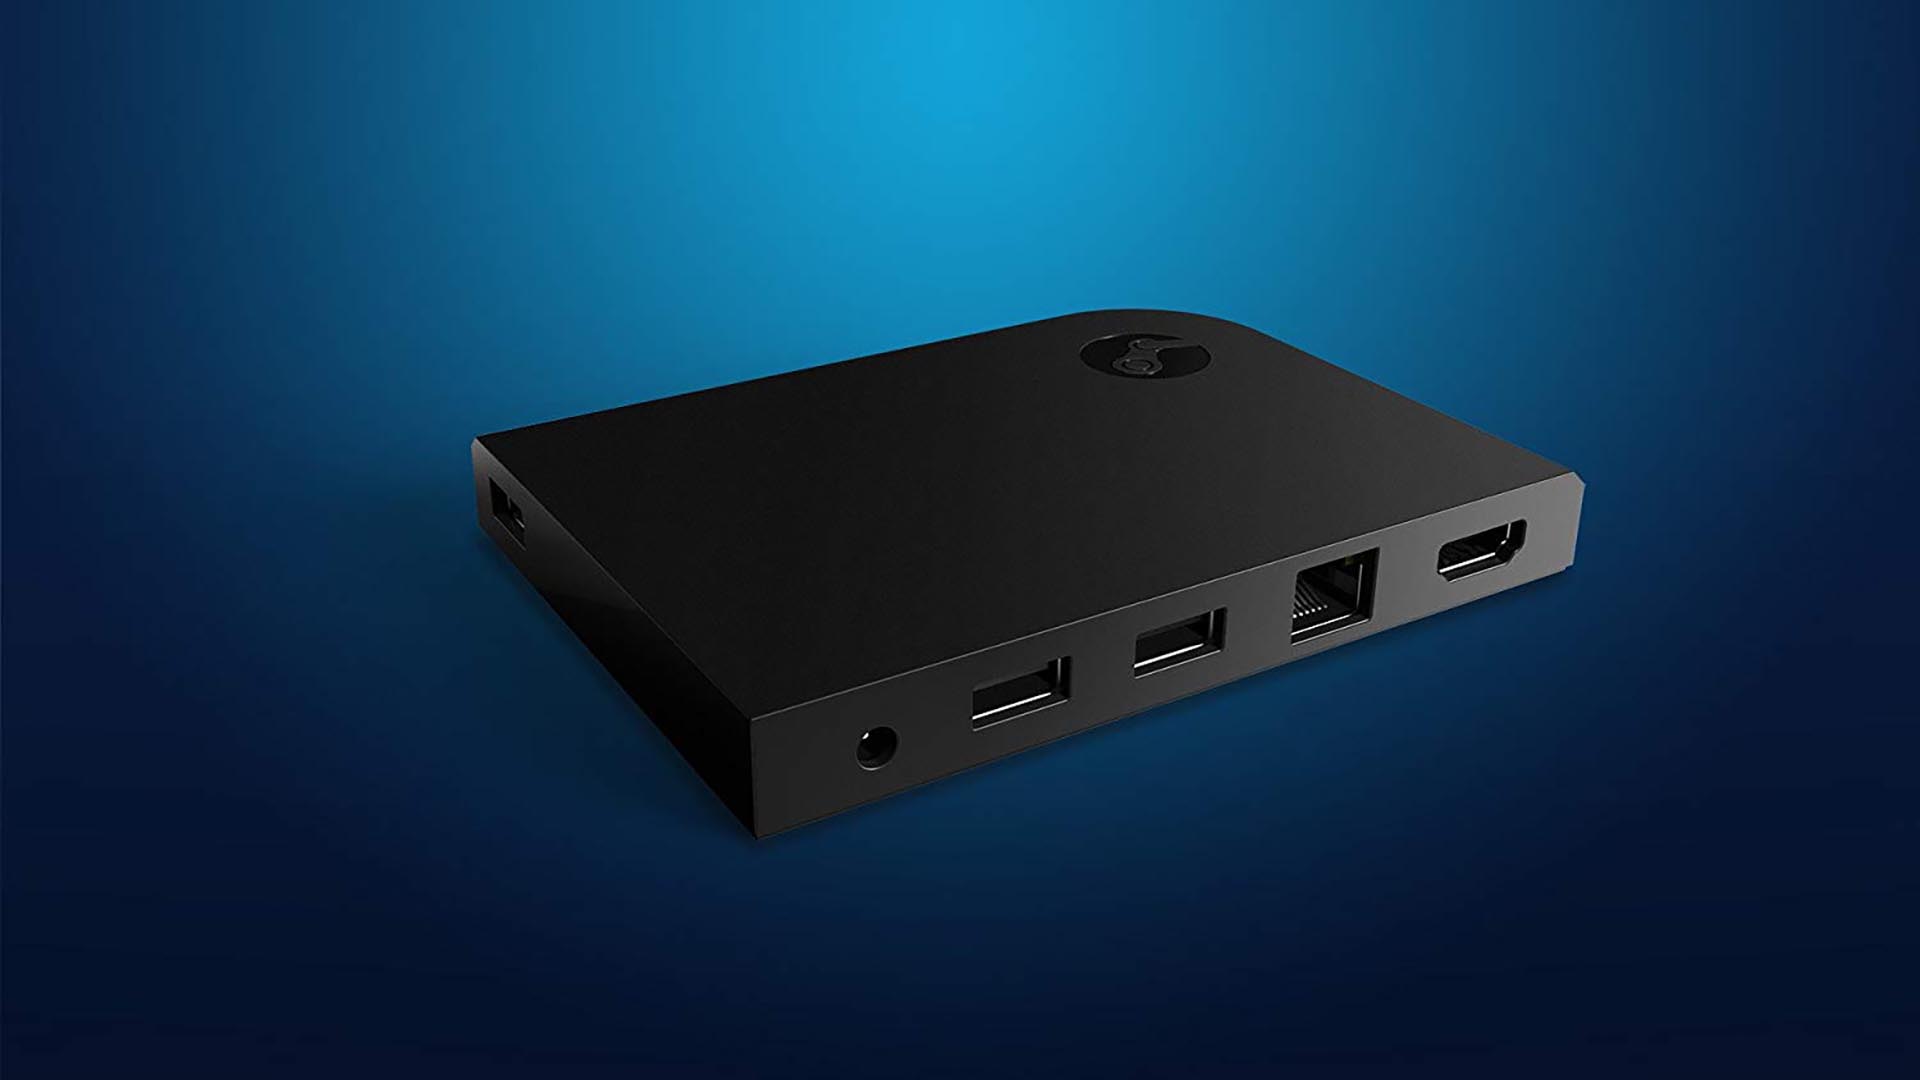 Now you can build your own Steam Link using a Raspberry Pi